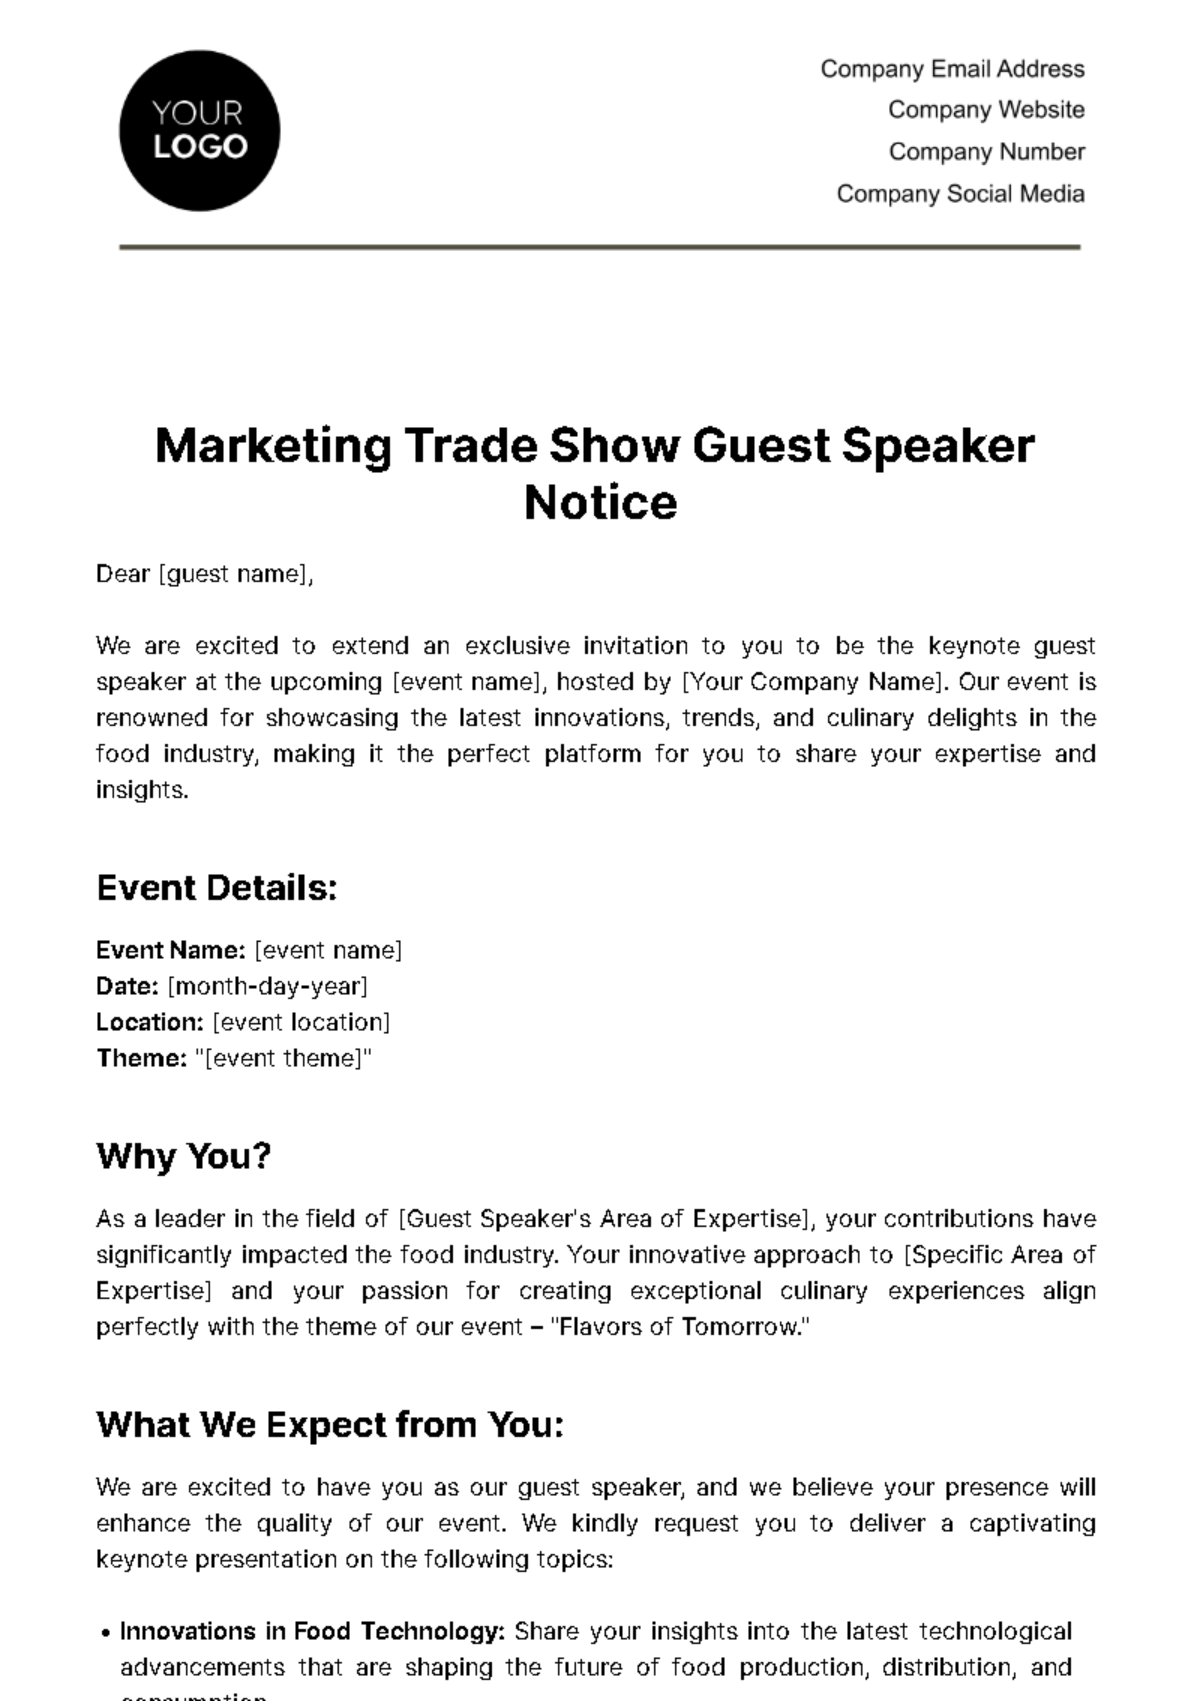 Free Marketing Trade Show Guest Speaker Notice Template